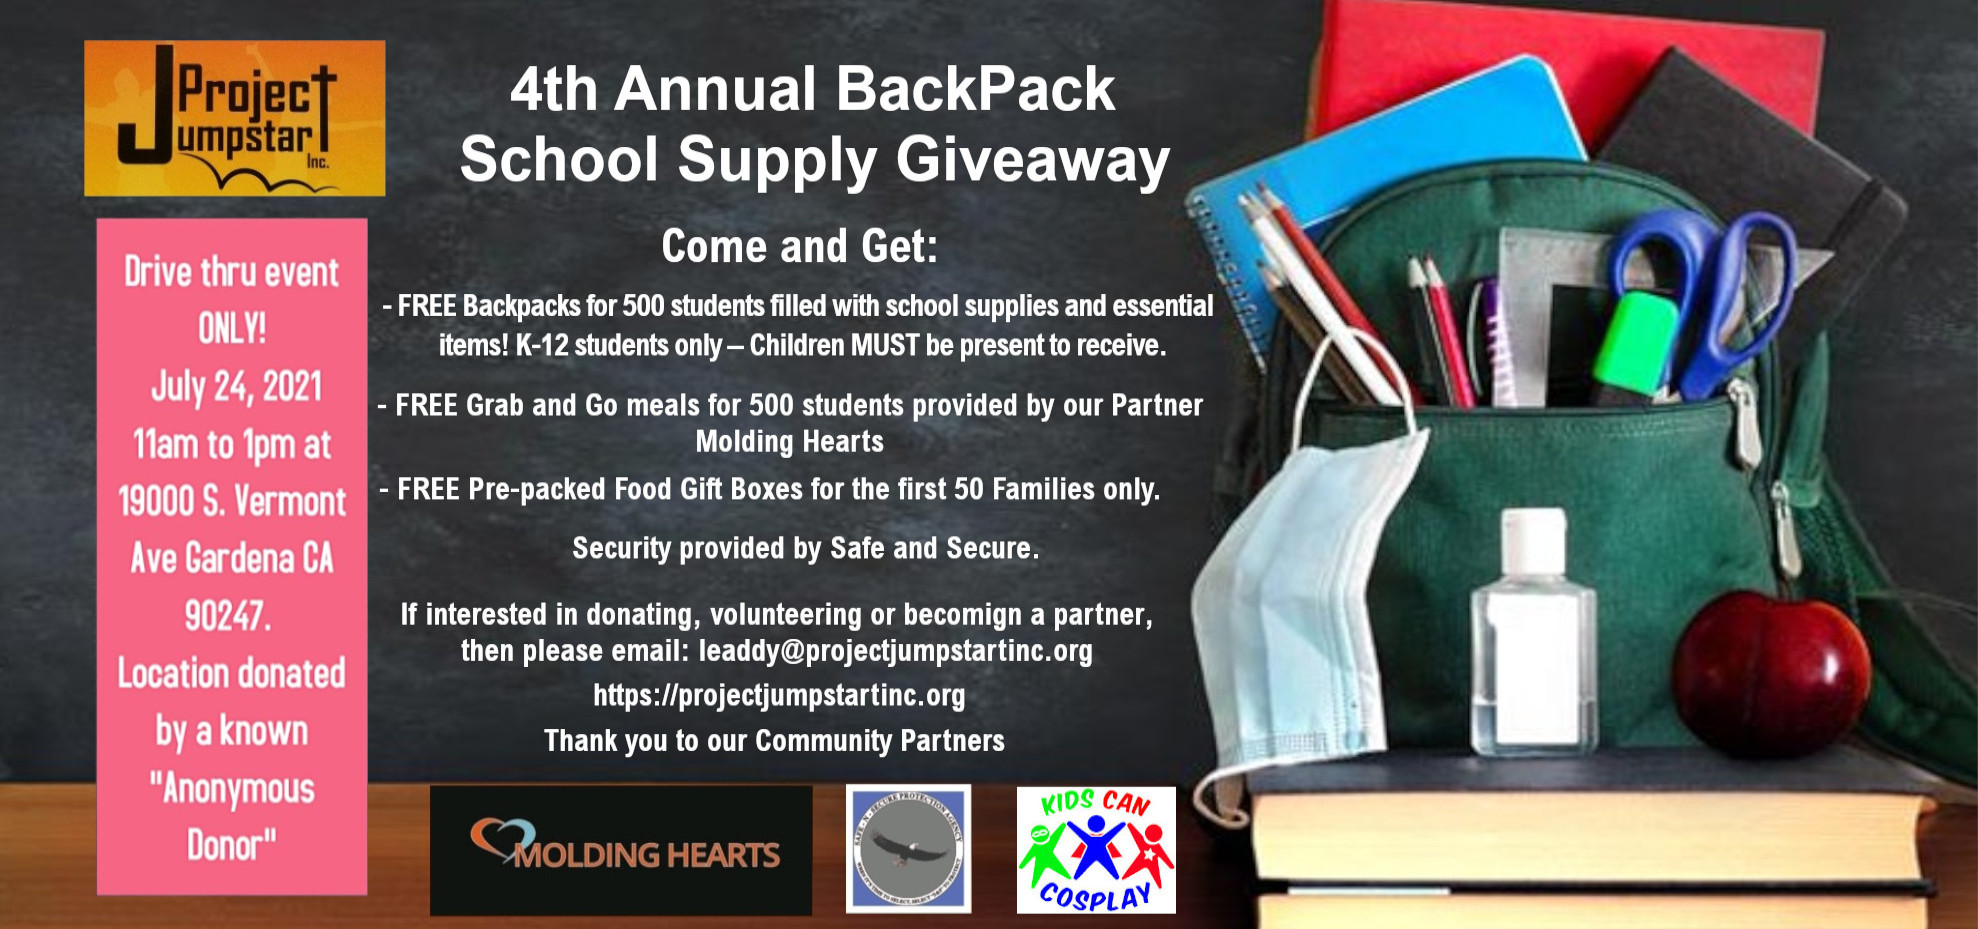 4th Annual Backpack School Supply Giveaway Kids Can Cosplay